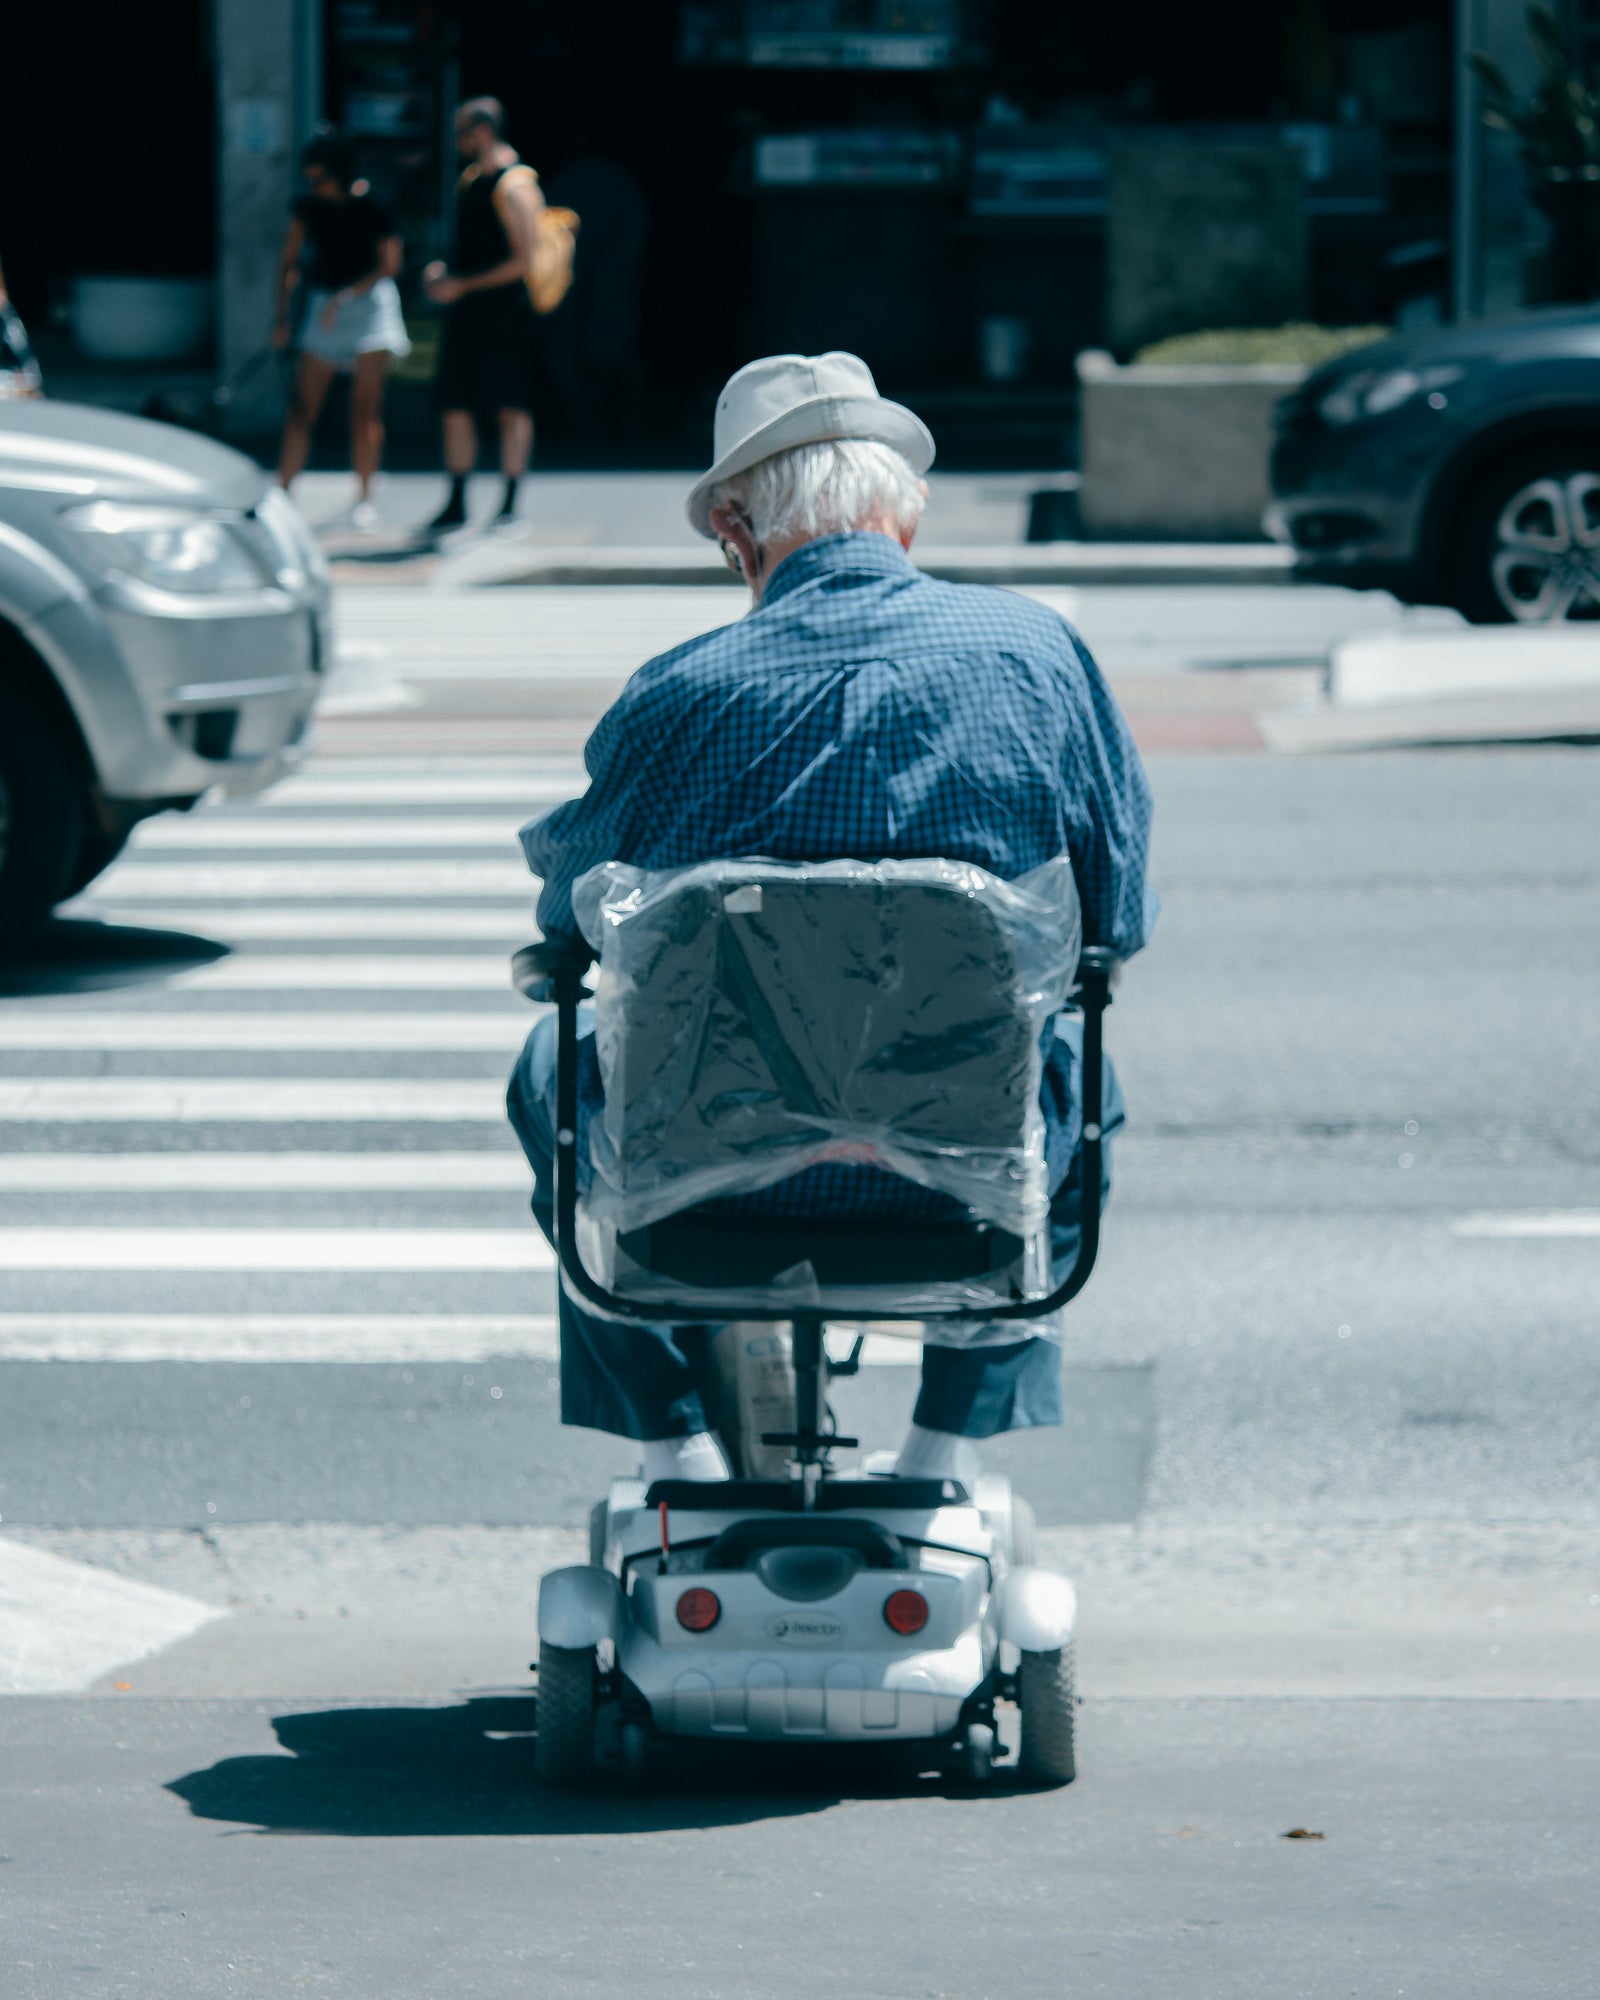 A senior man with a hat and sunglasses is sitting on a mobility scooter while holding a walking stick, with a happy expression on his face.